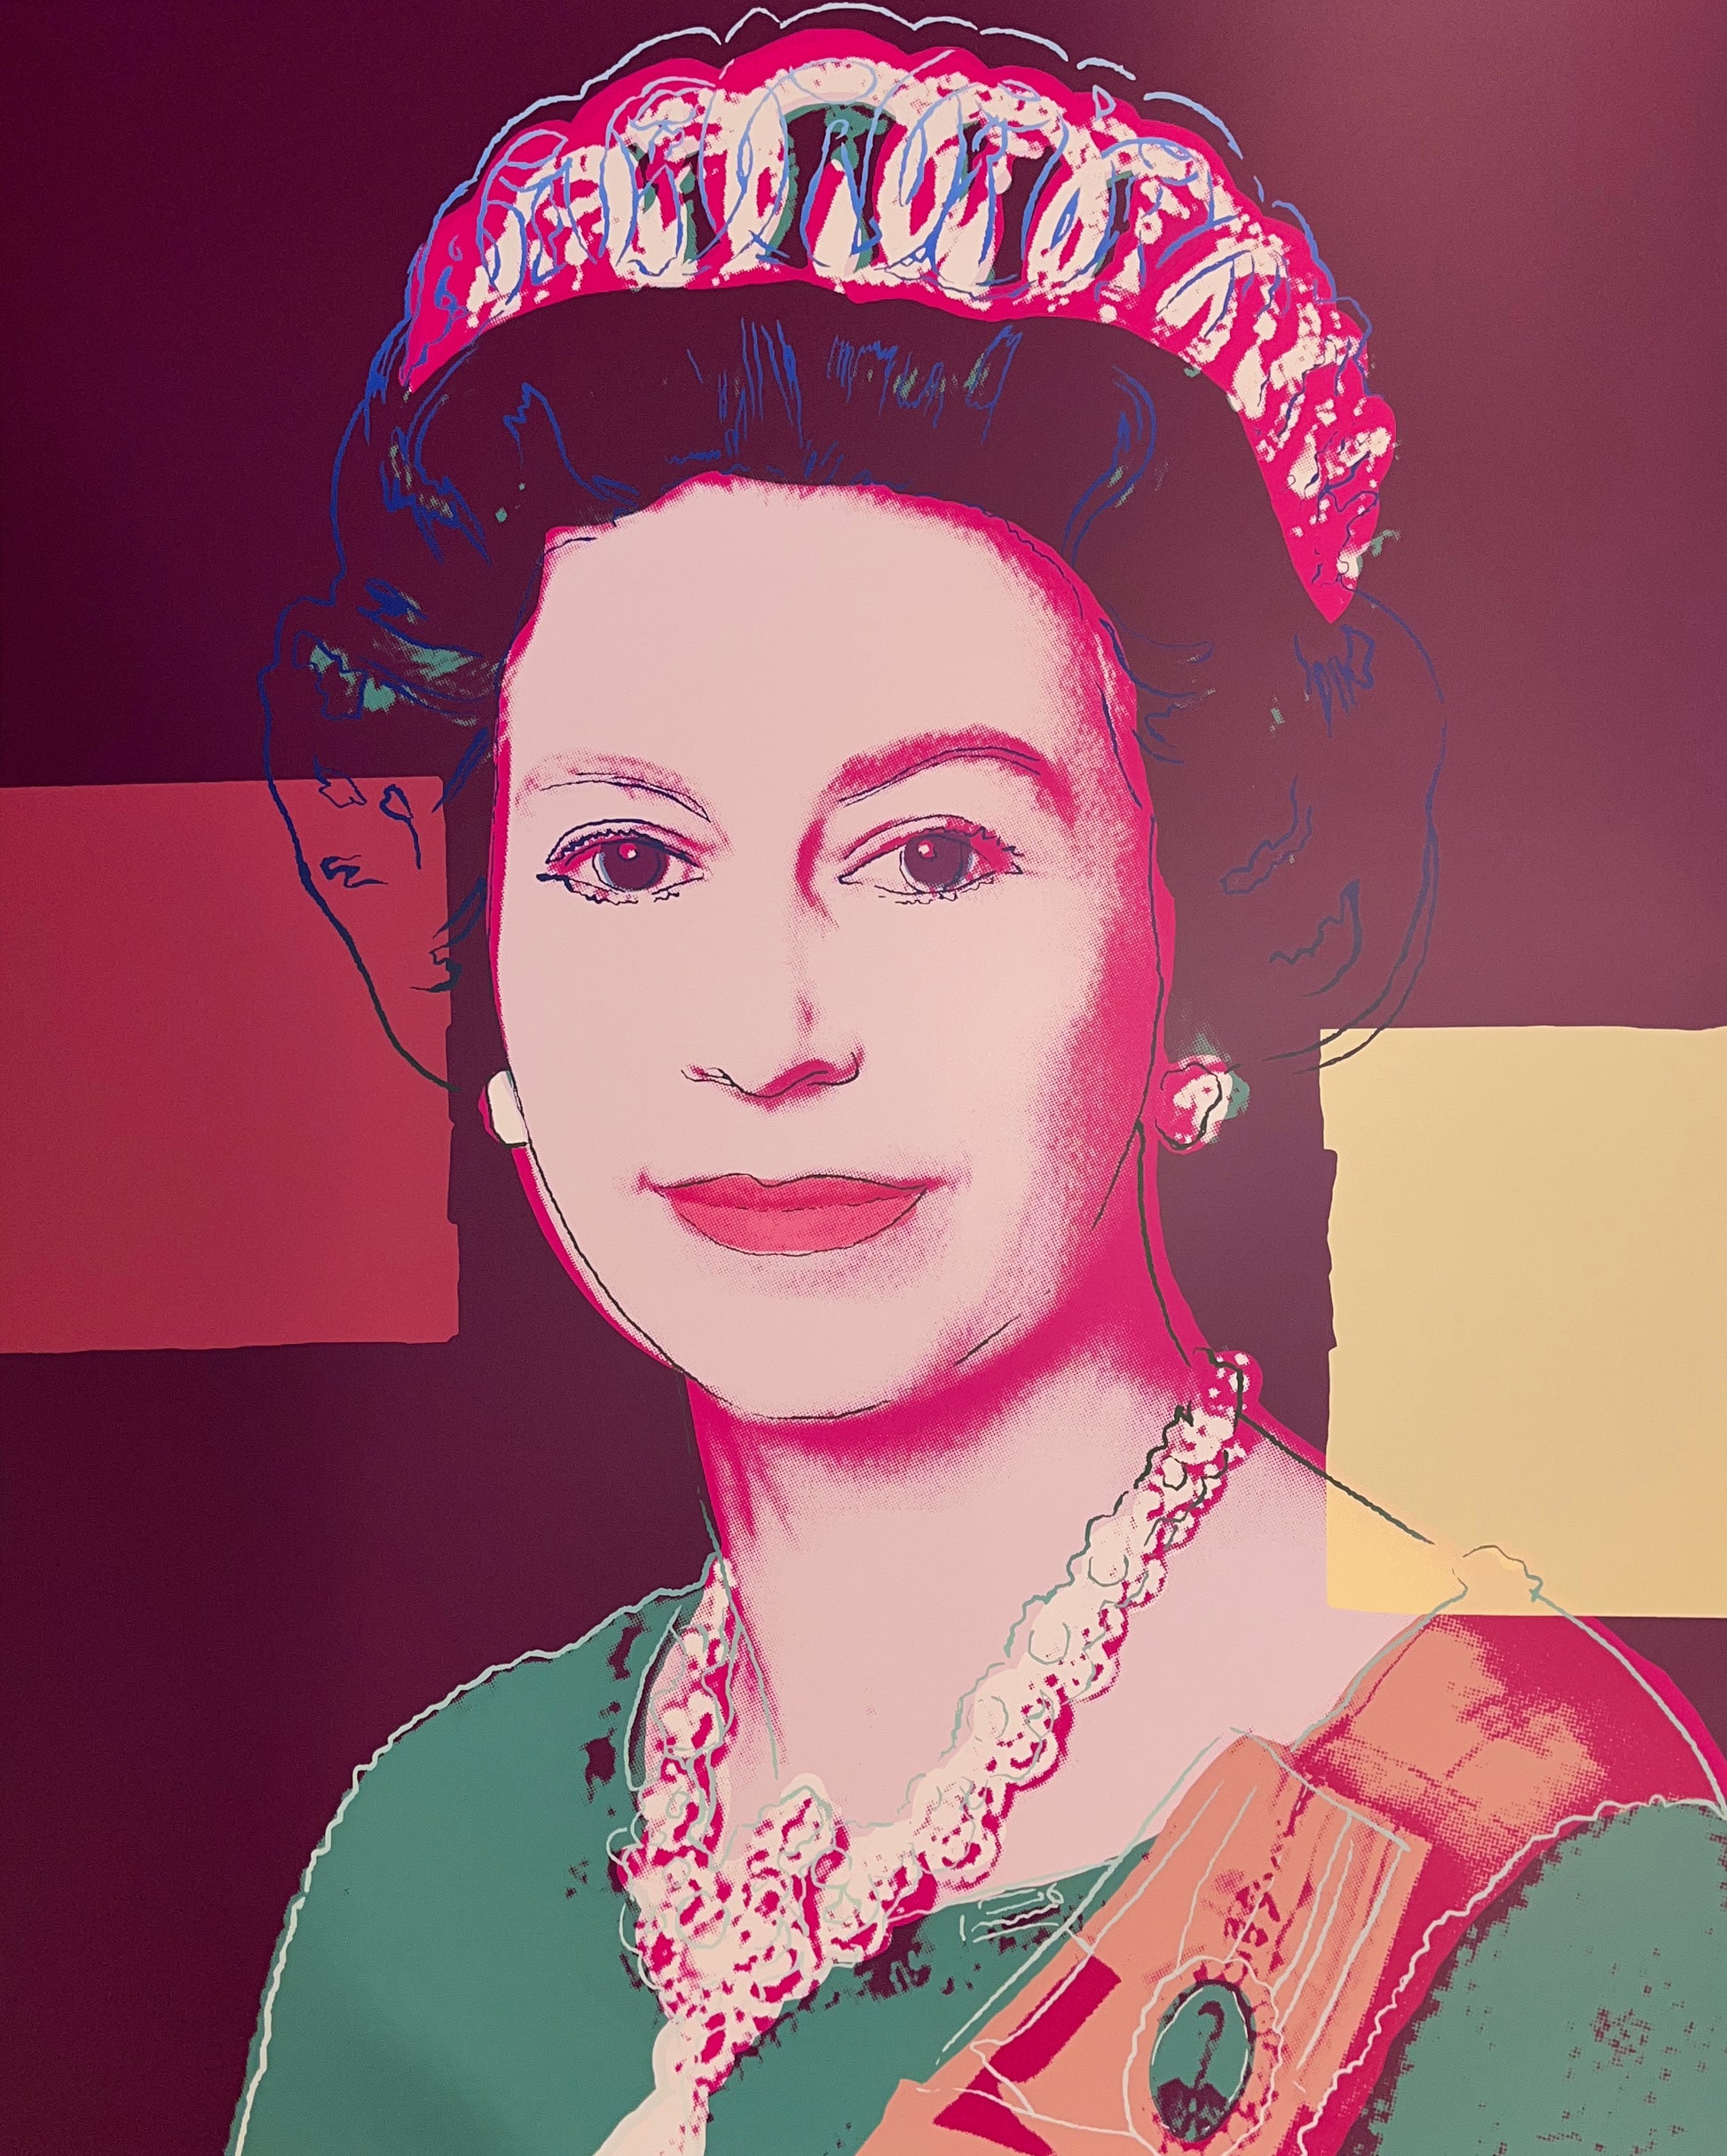 an image of an artwork by andy warhol titled 335 queen elizabeth II. the image features a young queen elizabeth in a colourised pop art style, with green and orange clothing and a pink-toned face. the background is mauve and there are two square blocks of colour, one in red on the left, and one yellow on the right. the image is a screenprint by sunday b morning